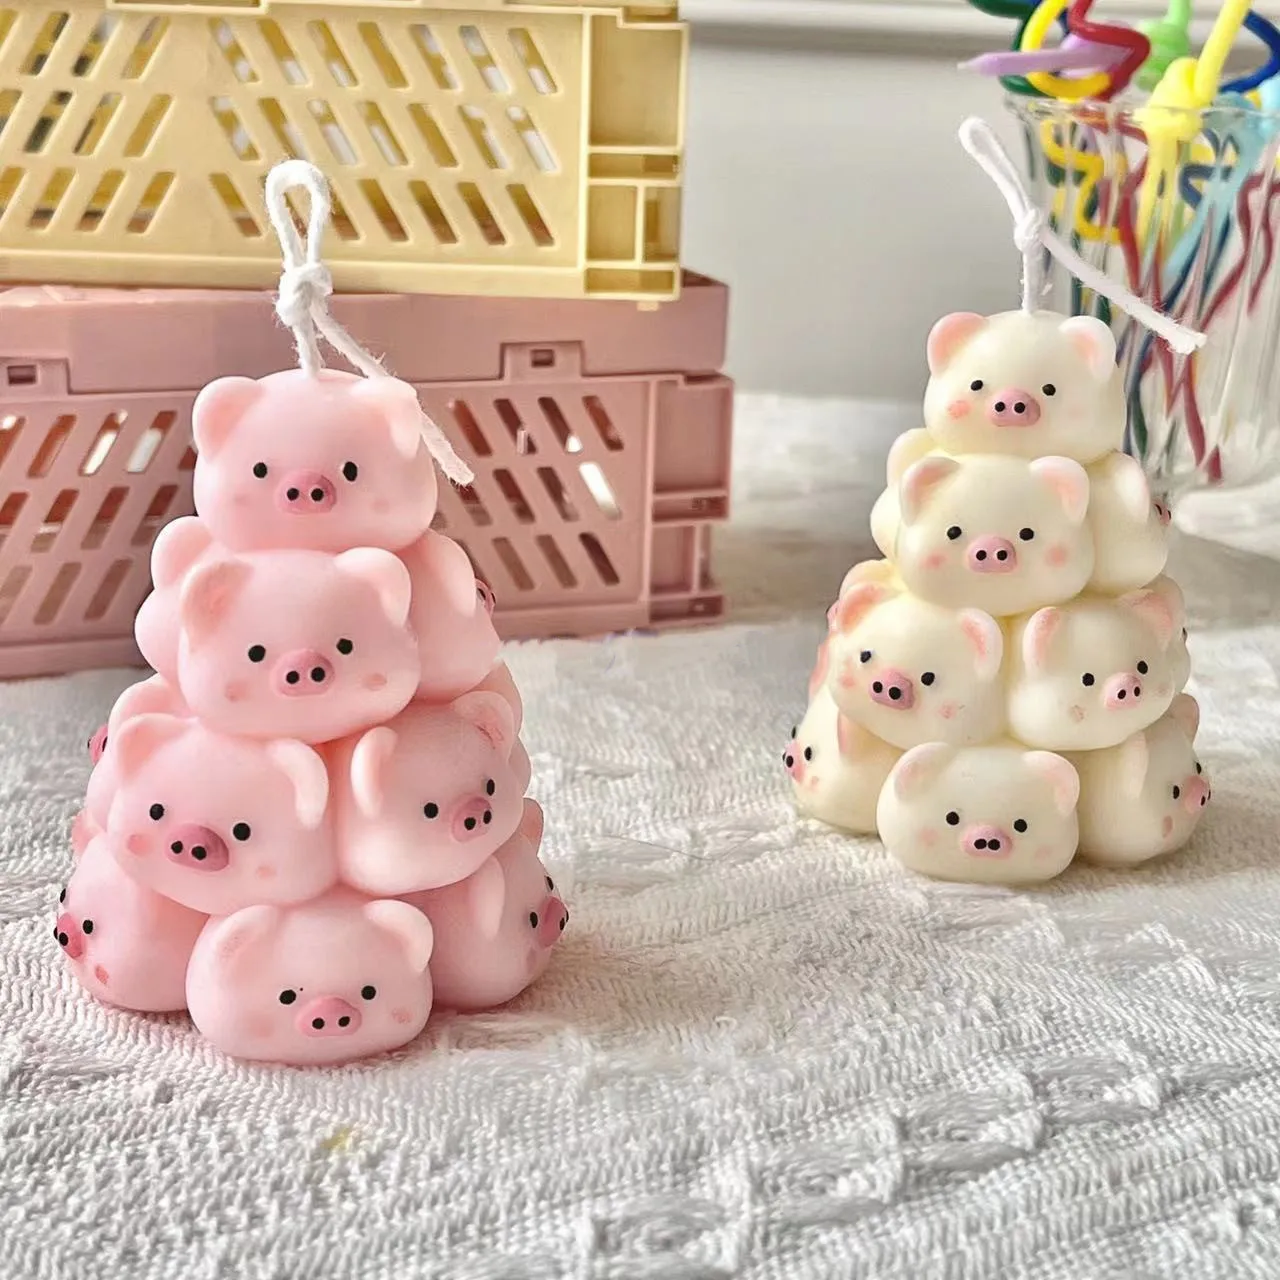 Cute Pig Silicone Mold Folding Piggy Silicone Mold Candle Mold for Candle Making DIY Fondant Cake Mold